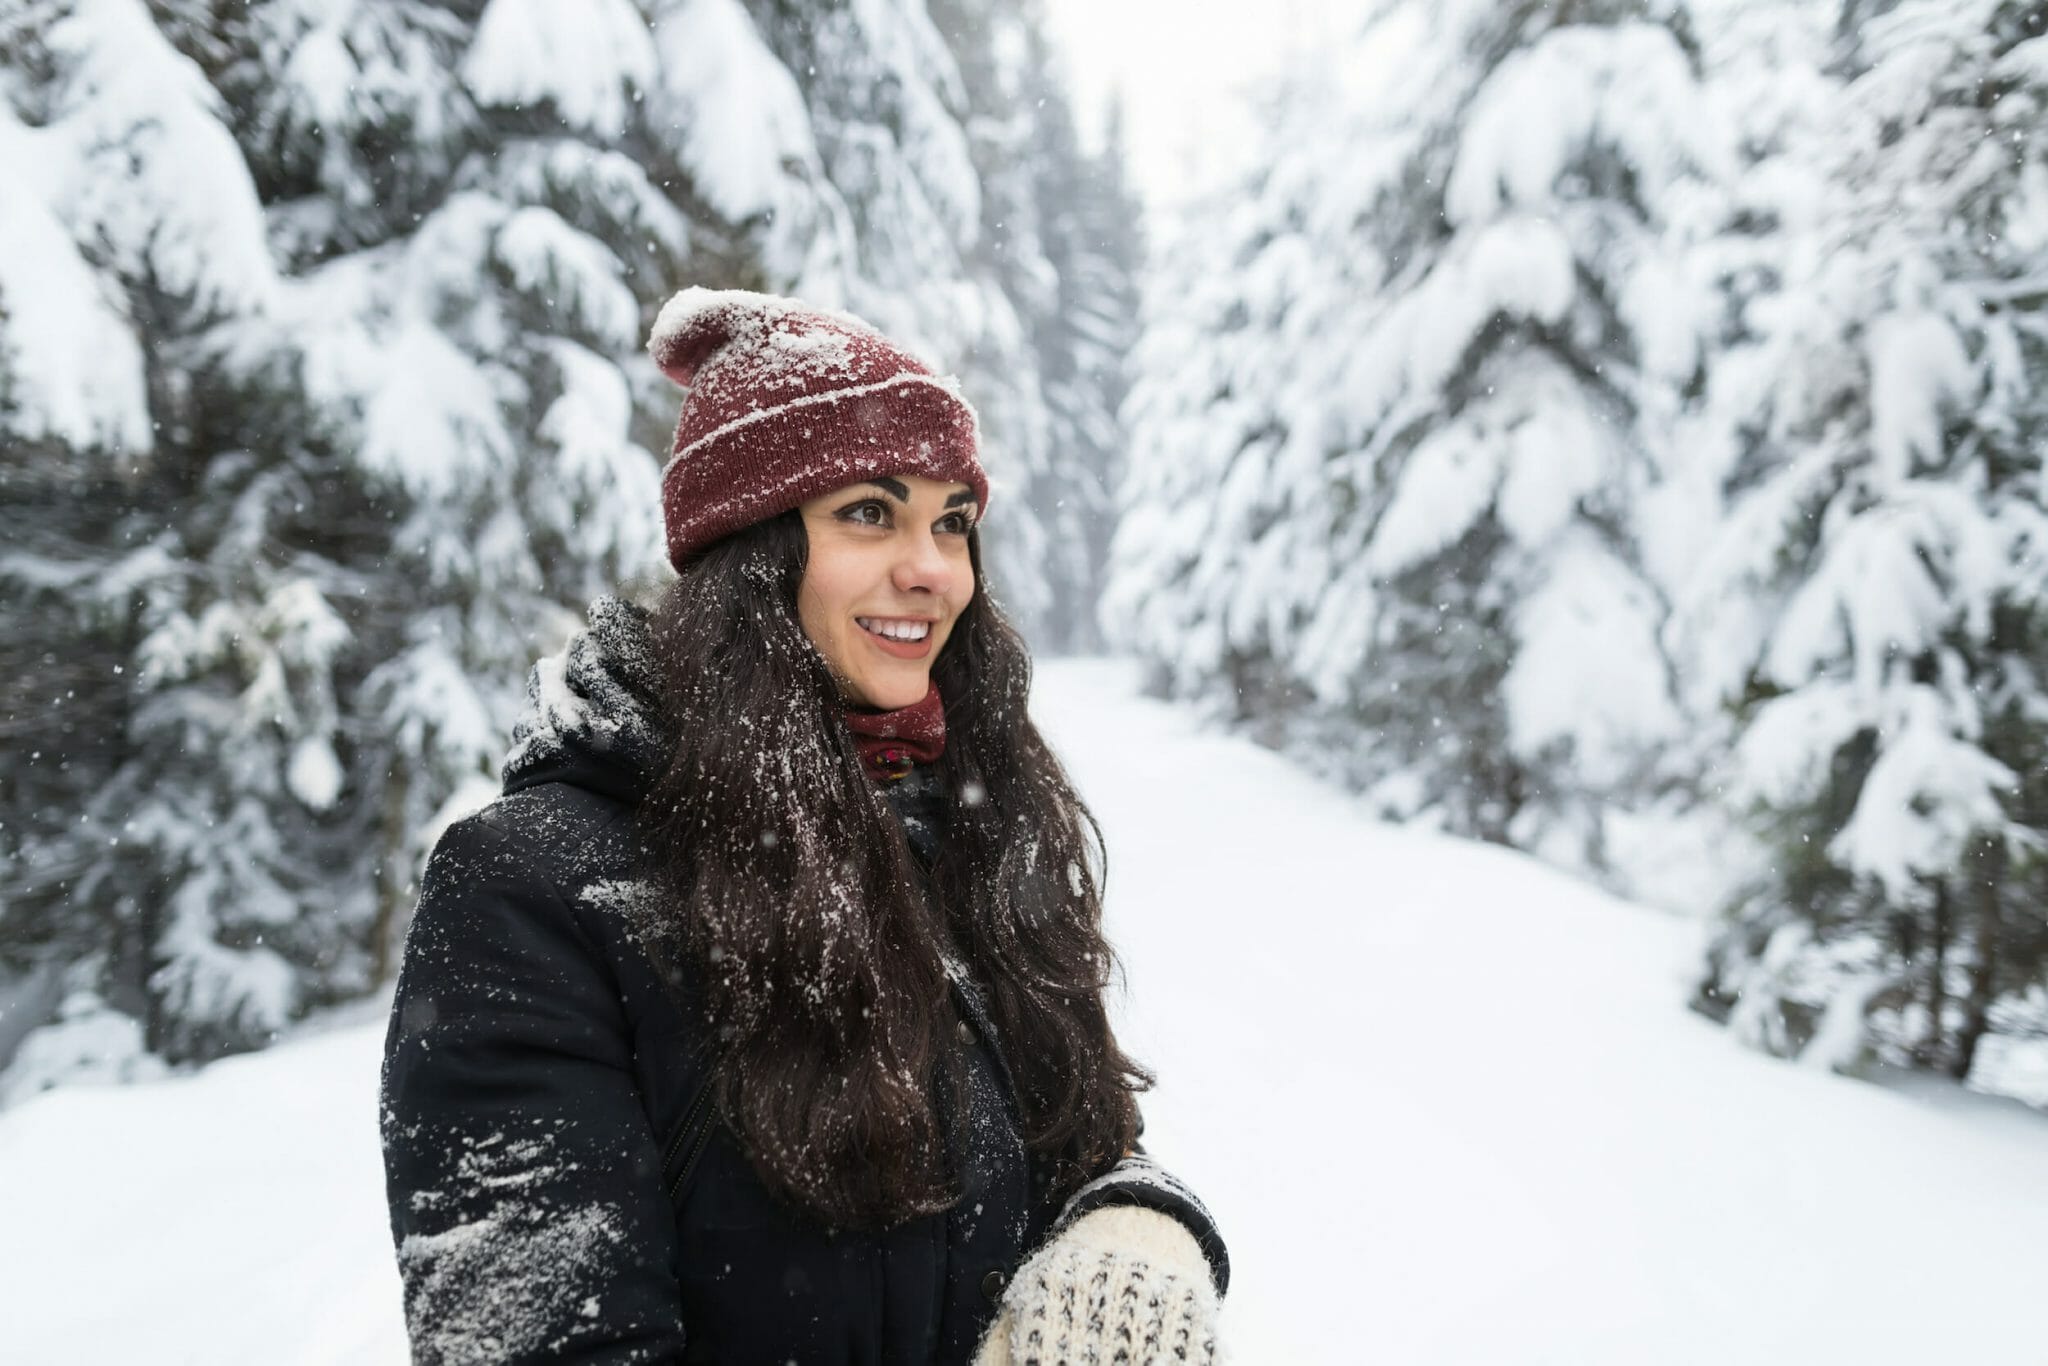 Young Beautiful Woman In Winter Snow Forest Girl Outdoors Walking Snowy White Park